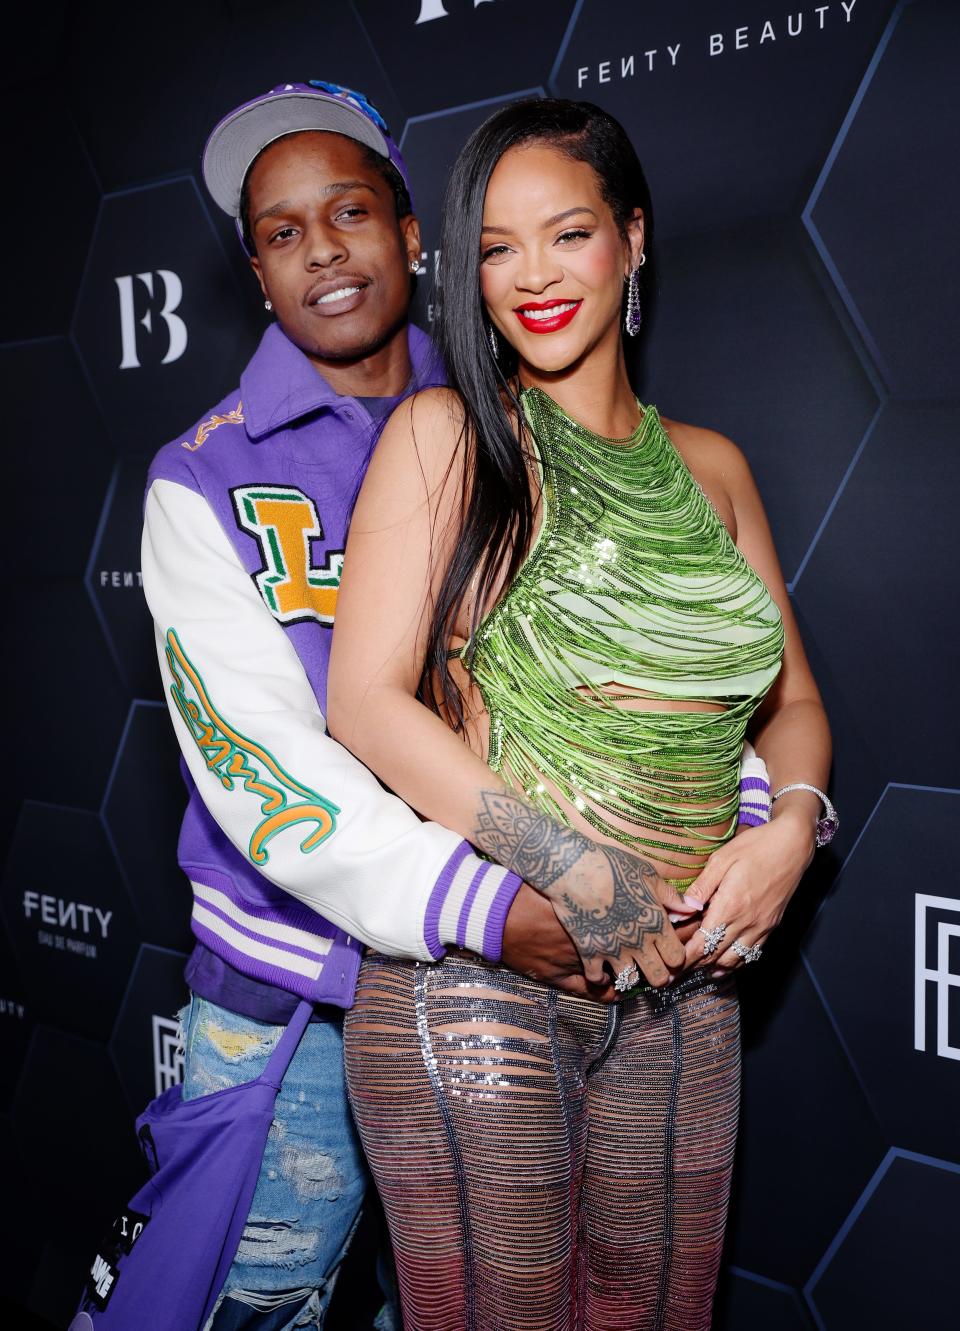 Rihanna discussed her blossoming relationship with A$AP Rocky from friends to partners.